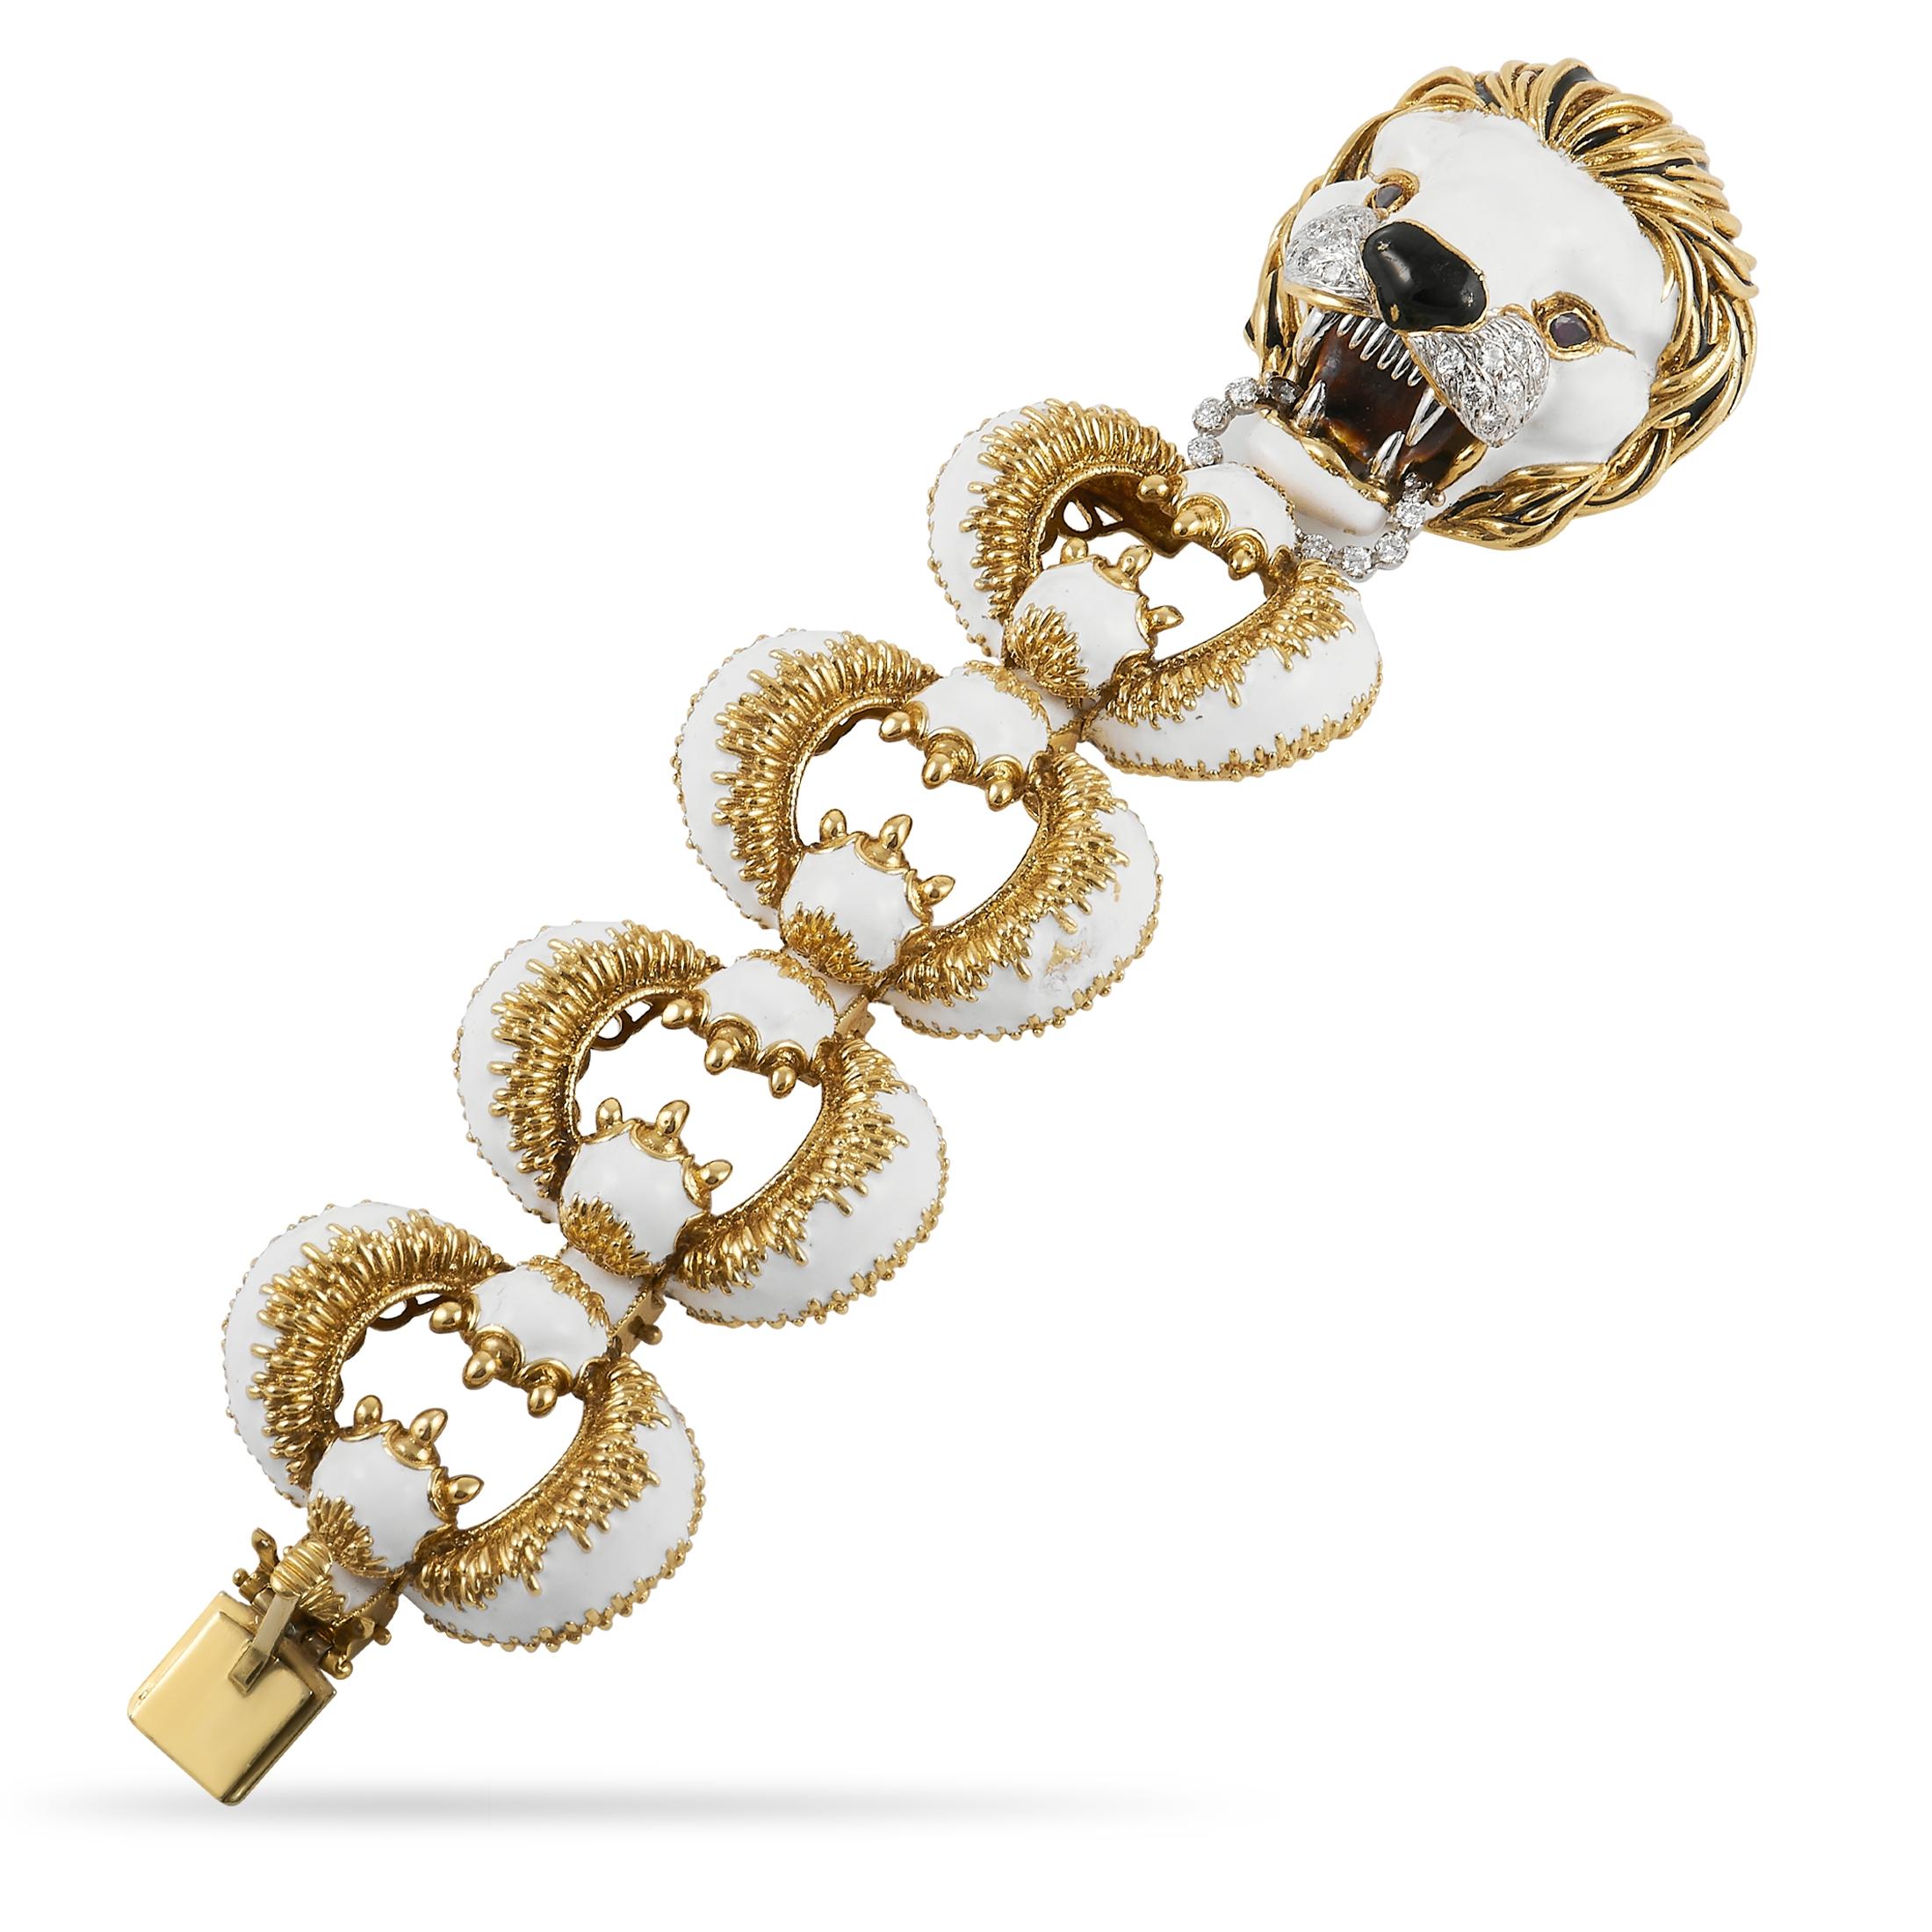 An exciting lion motif is the hallmark of this exquisite Prescarolli bracelet. A striking combination of 18K Yellow Gold and white enamel accents set the stage for this piece’s 1.15 carats of glittering diamonds. It measures 7” long and is sure to